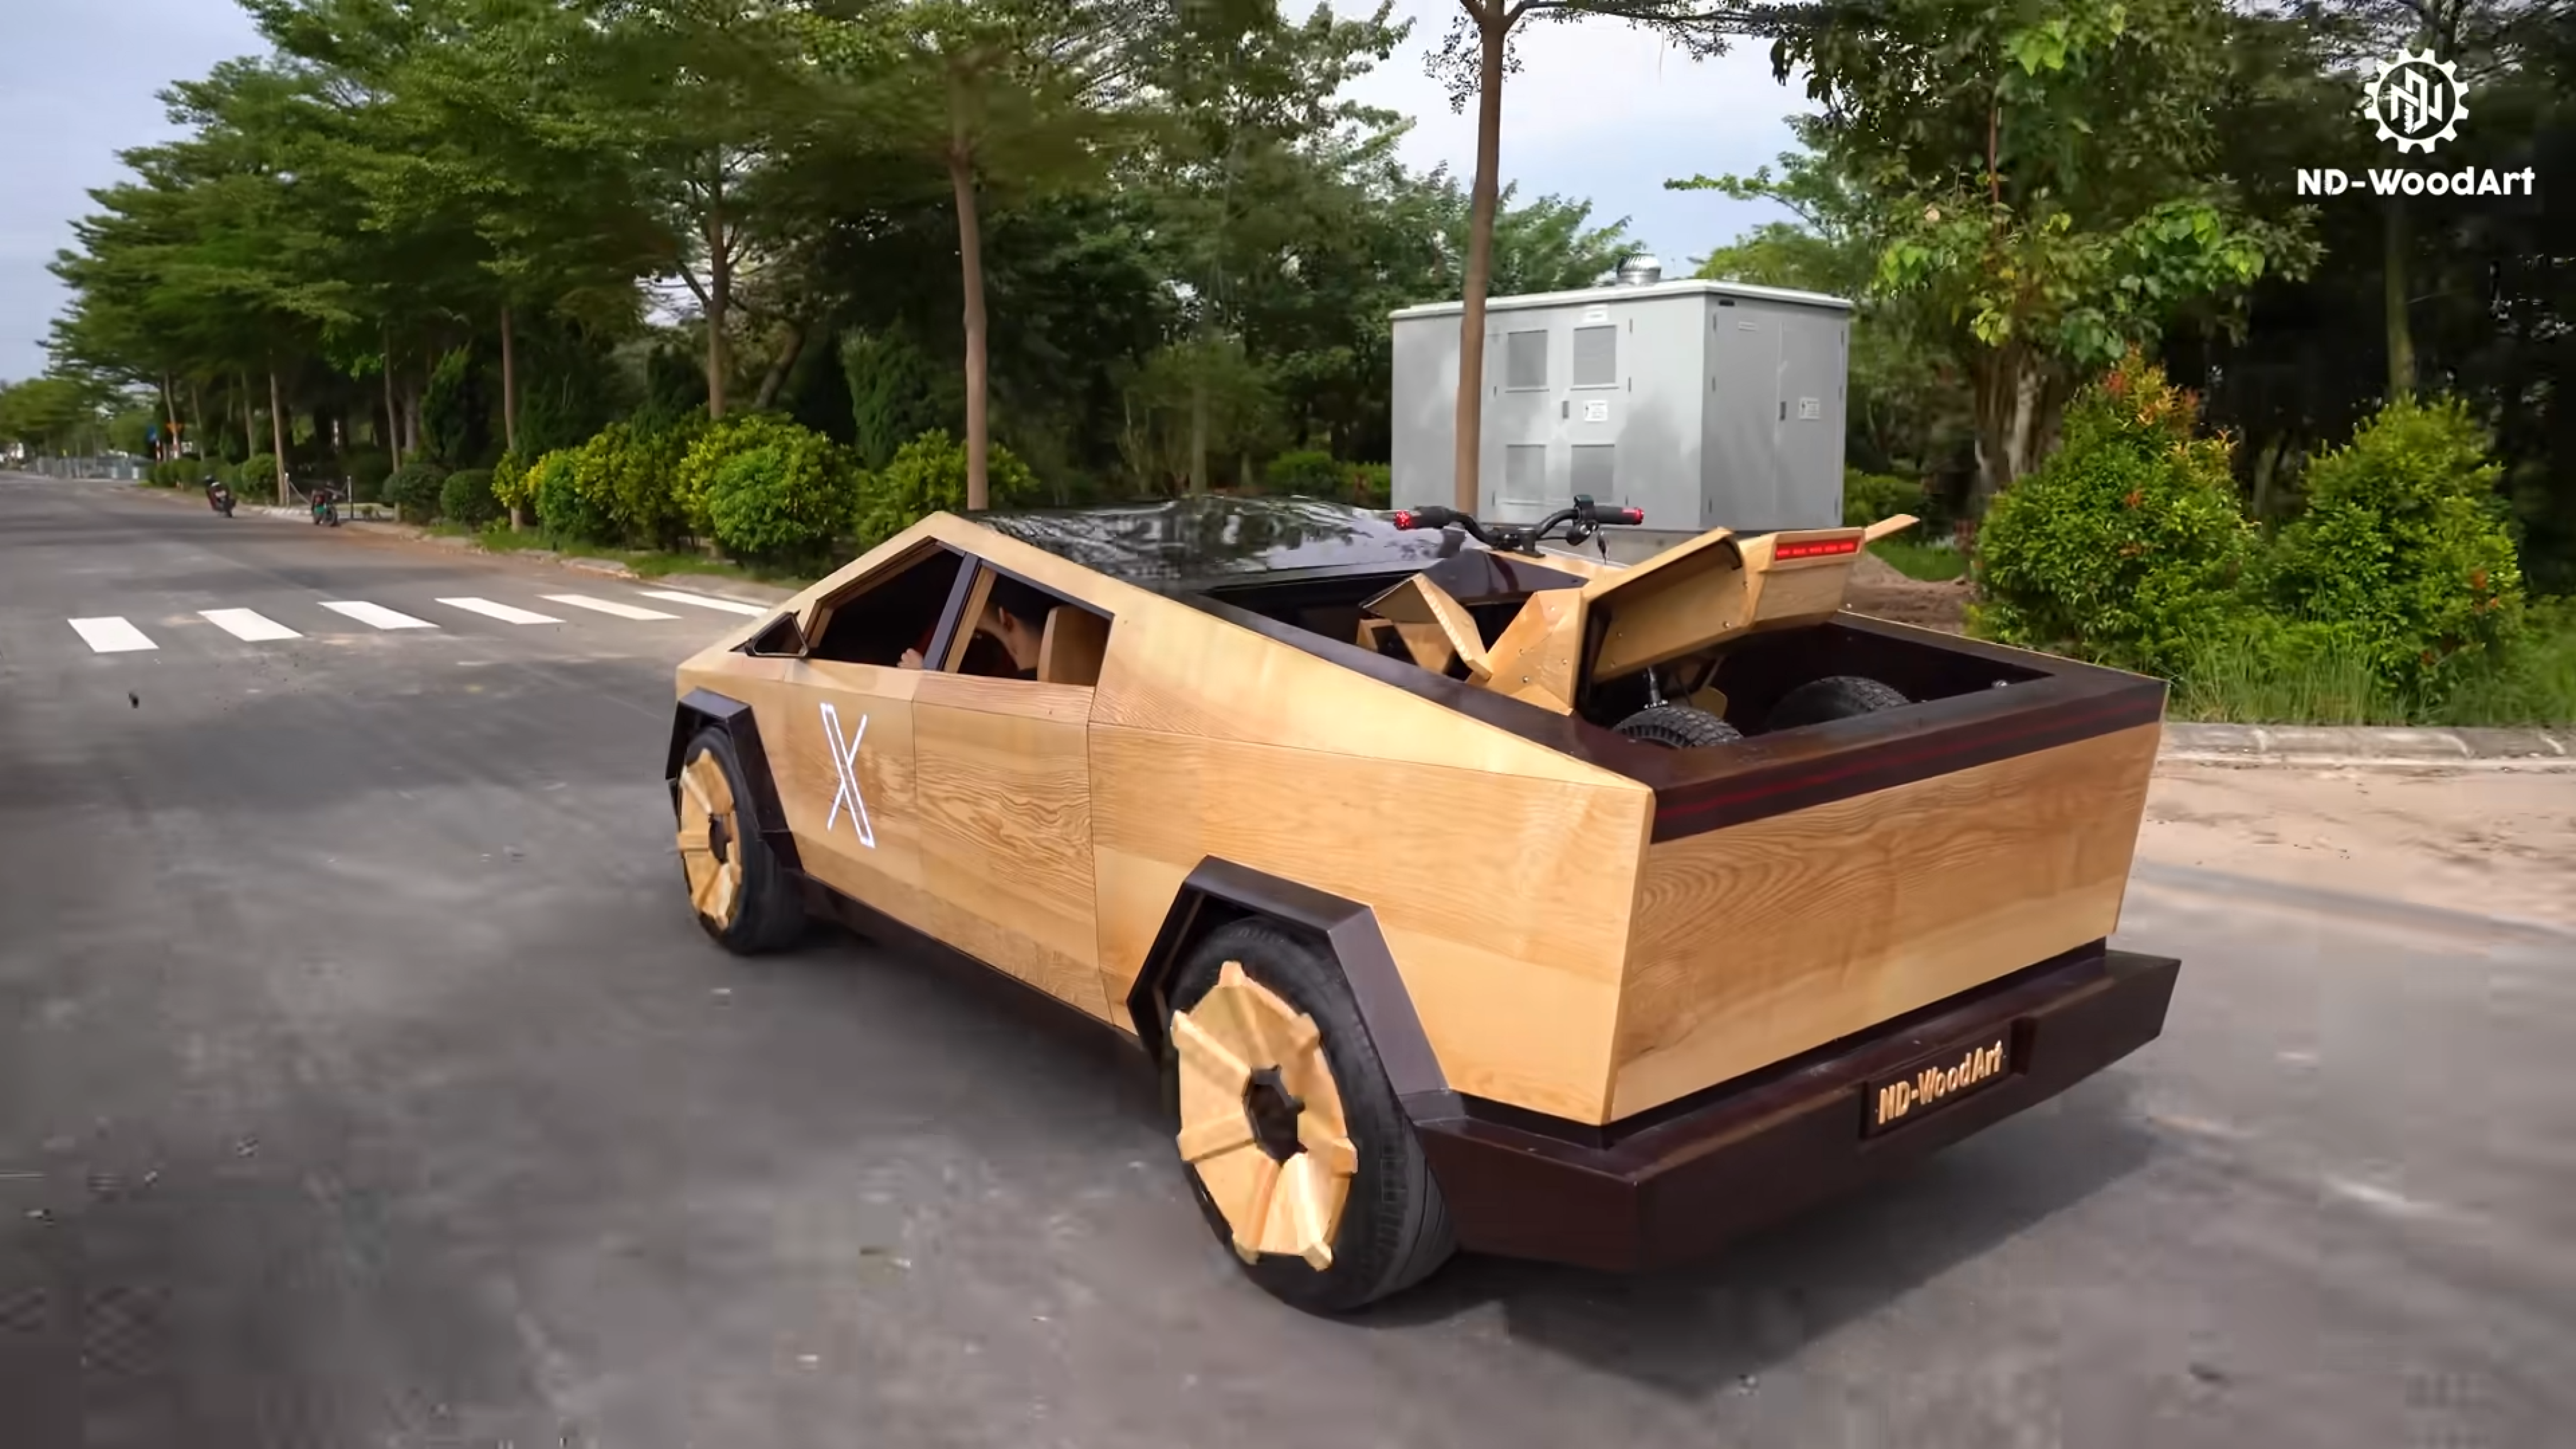 246f1d5d/nd woodwork dad builds wooden cybertruck for his kids 21 png